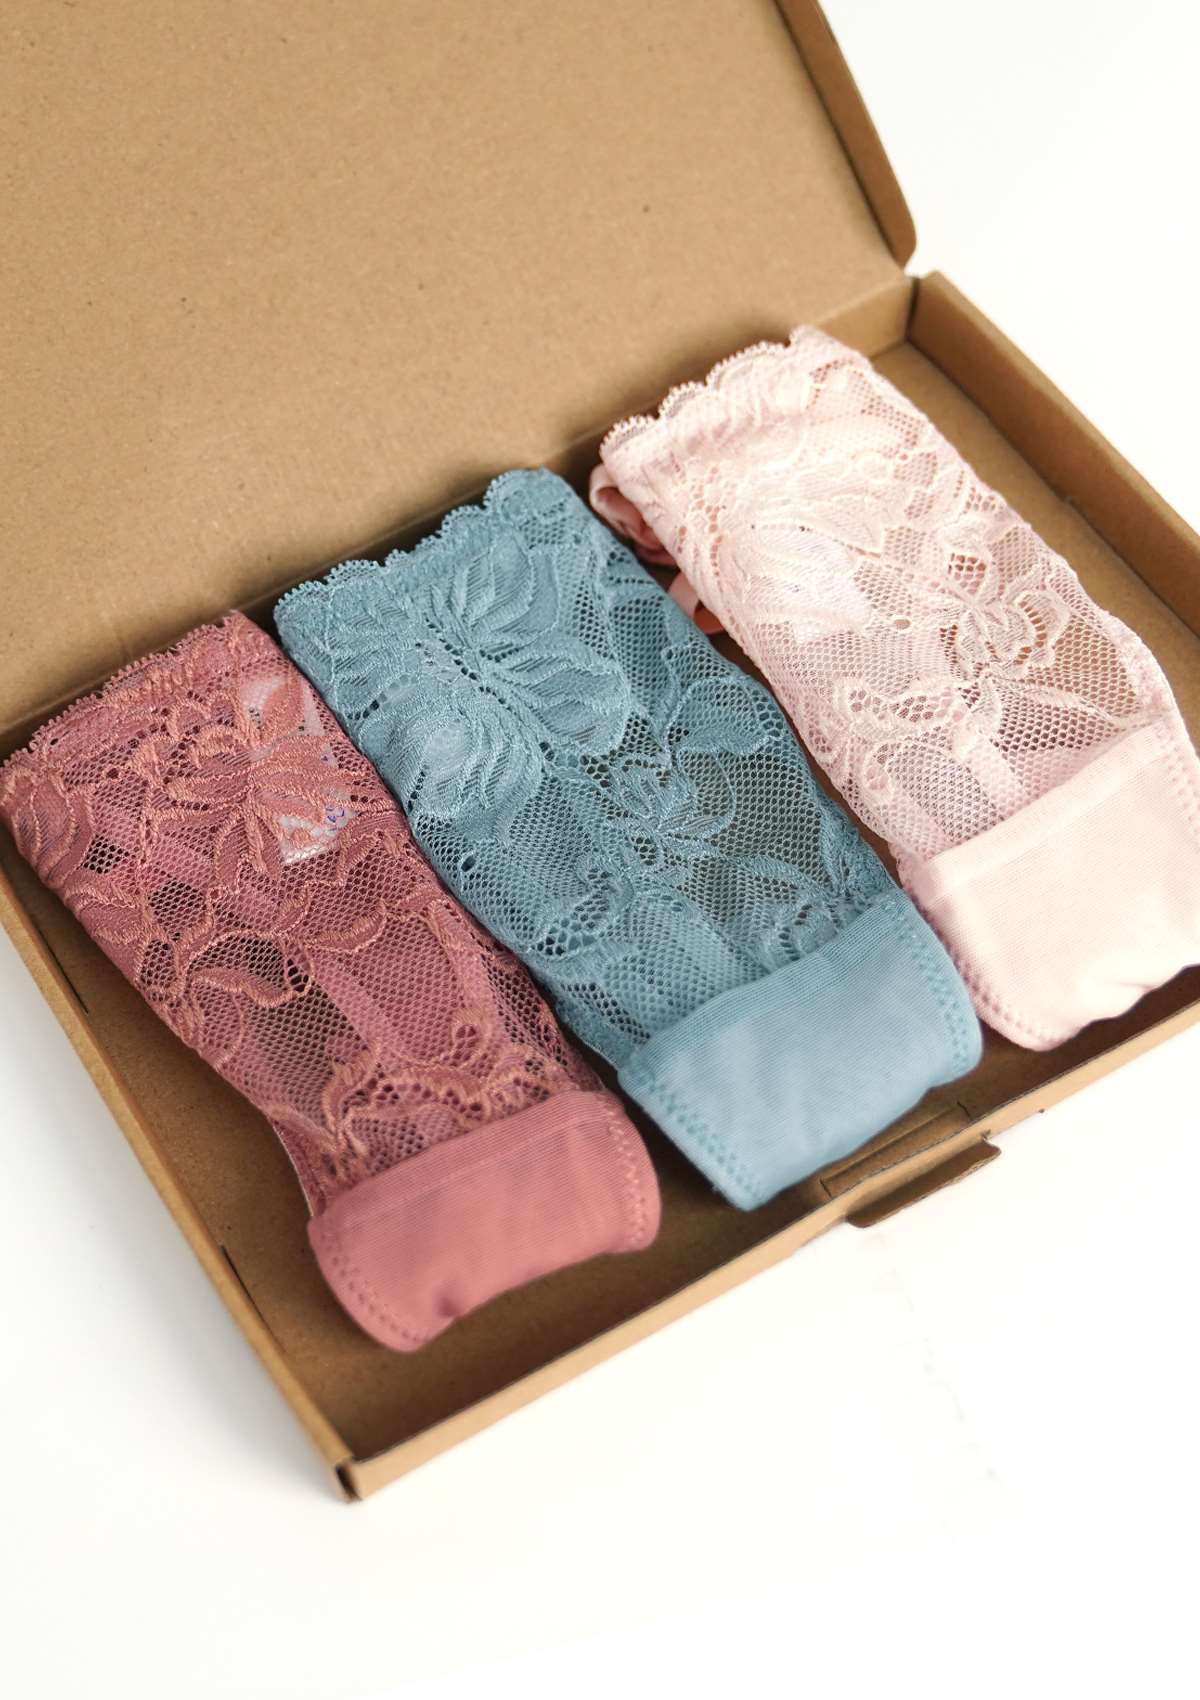 HSIA Pretty In Petals: 3-Pack Of Sexy Floral Chic Lace String Thongs - XL / Light Coral+Dusty Peach+Pewter Blue